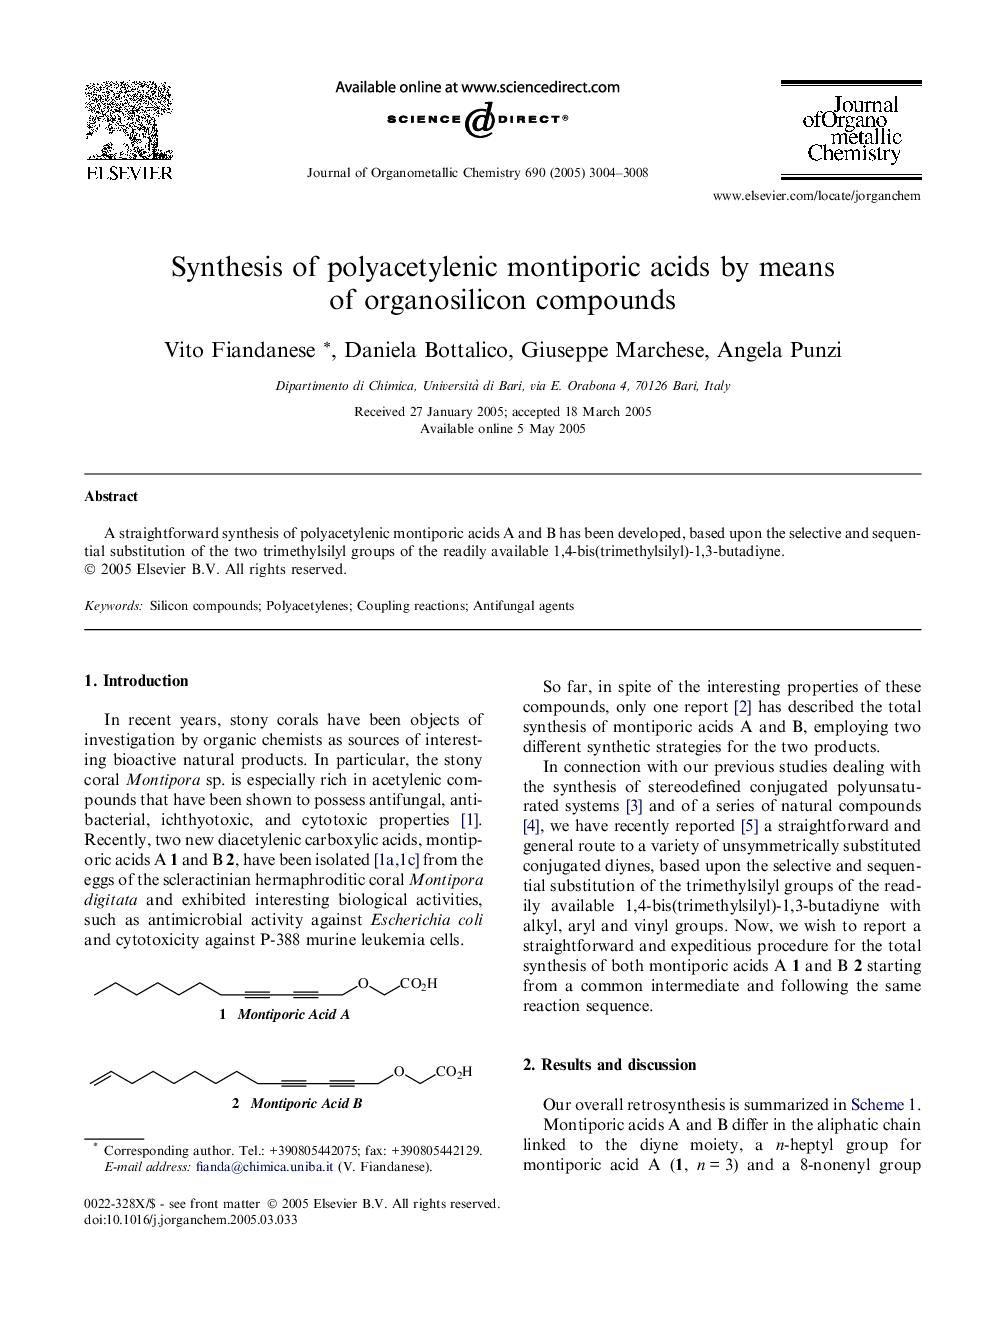 Synthesis of polyacetylenic montiporic acids by means of organosilicon compounds